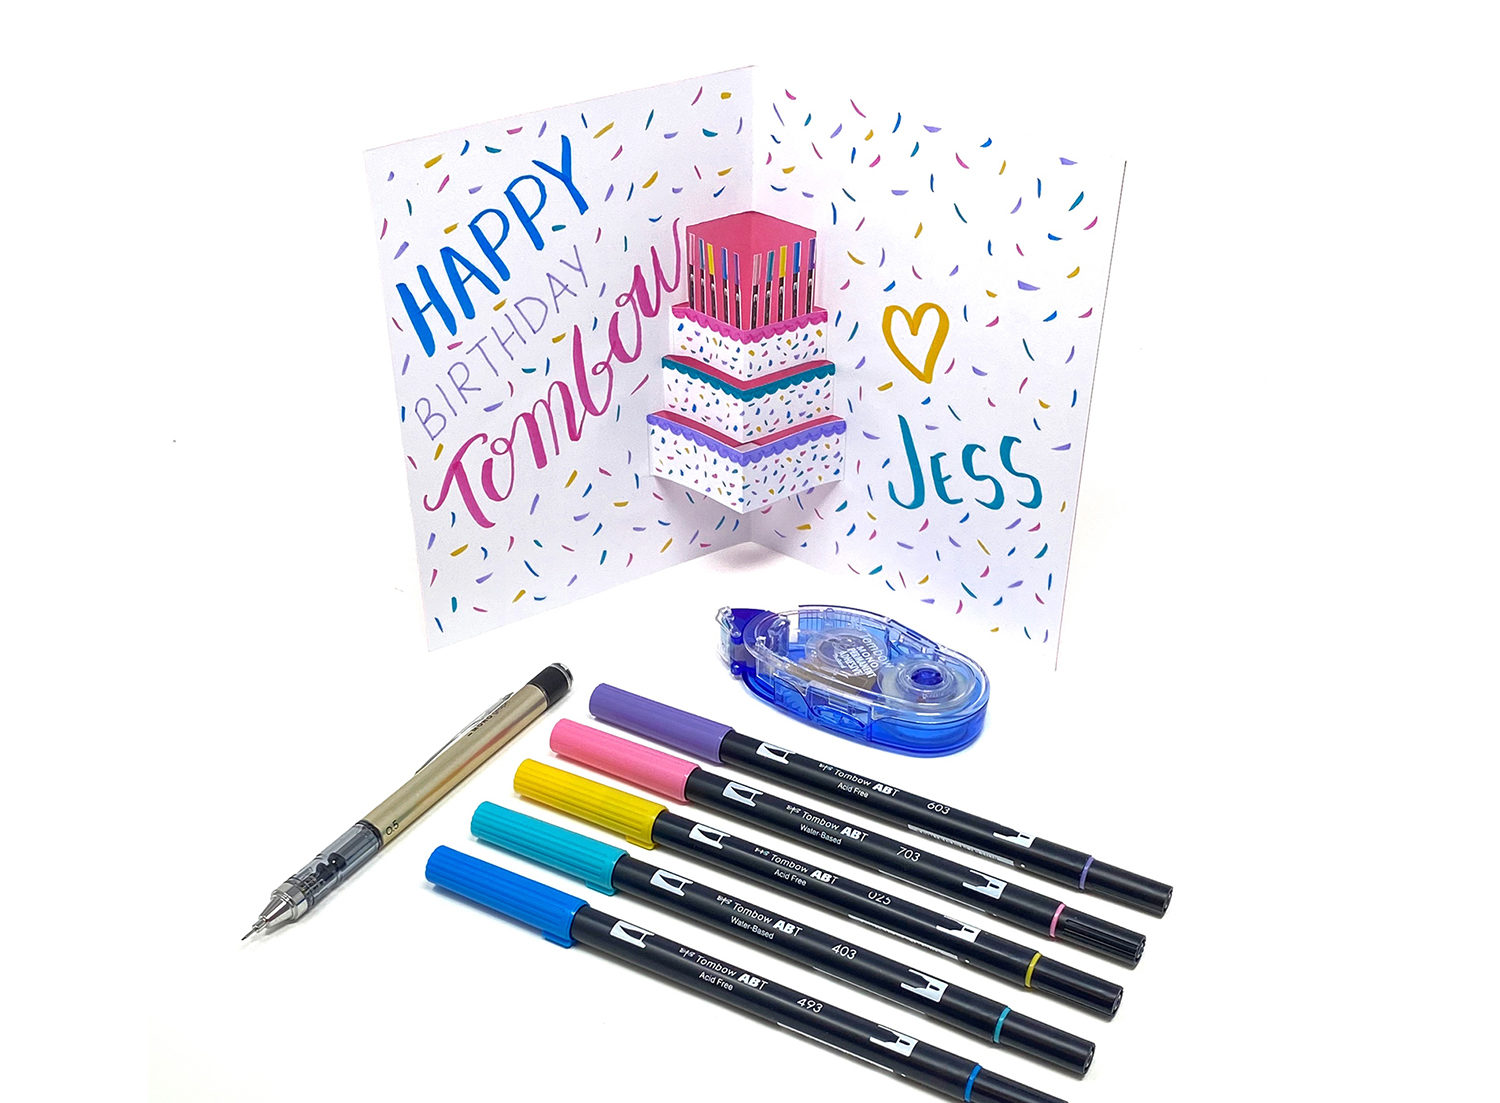 Easy Pop-Up Birthday Card by Jessica Mack on behalf of Tombow